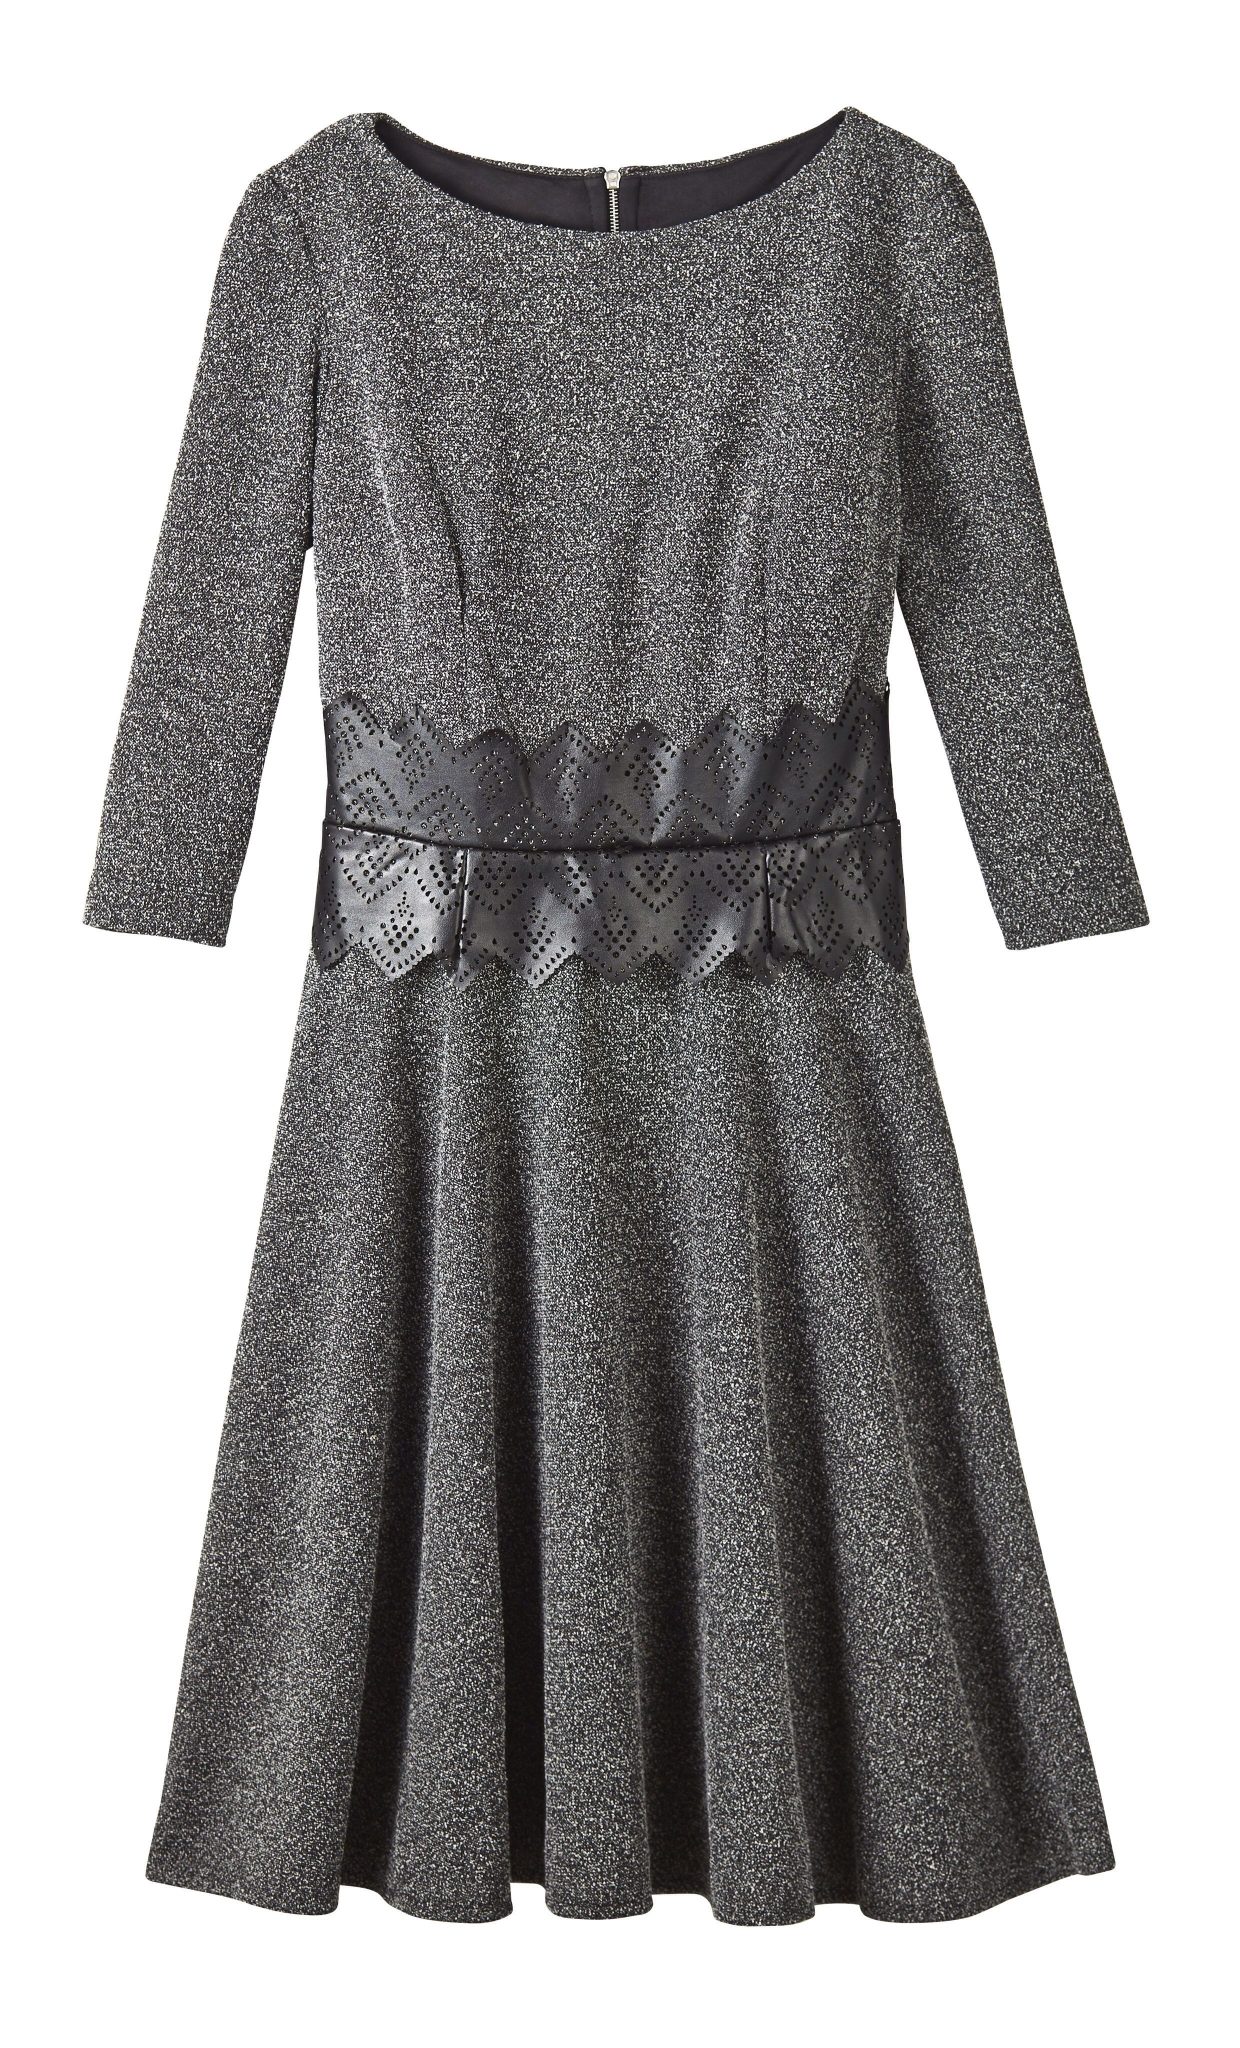 Dress With Faux Leather Waist Detail  $59.99  Compare at $120 